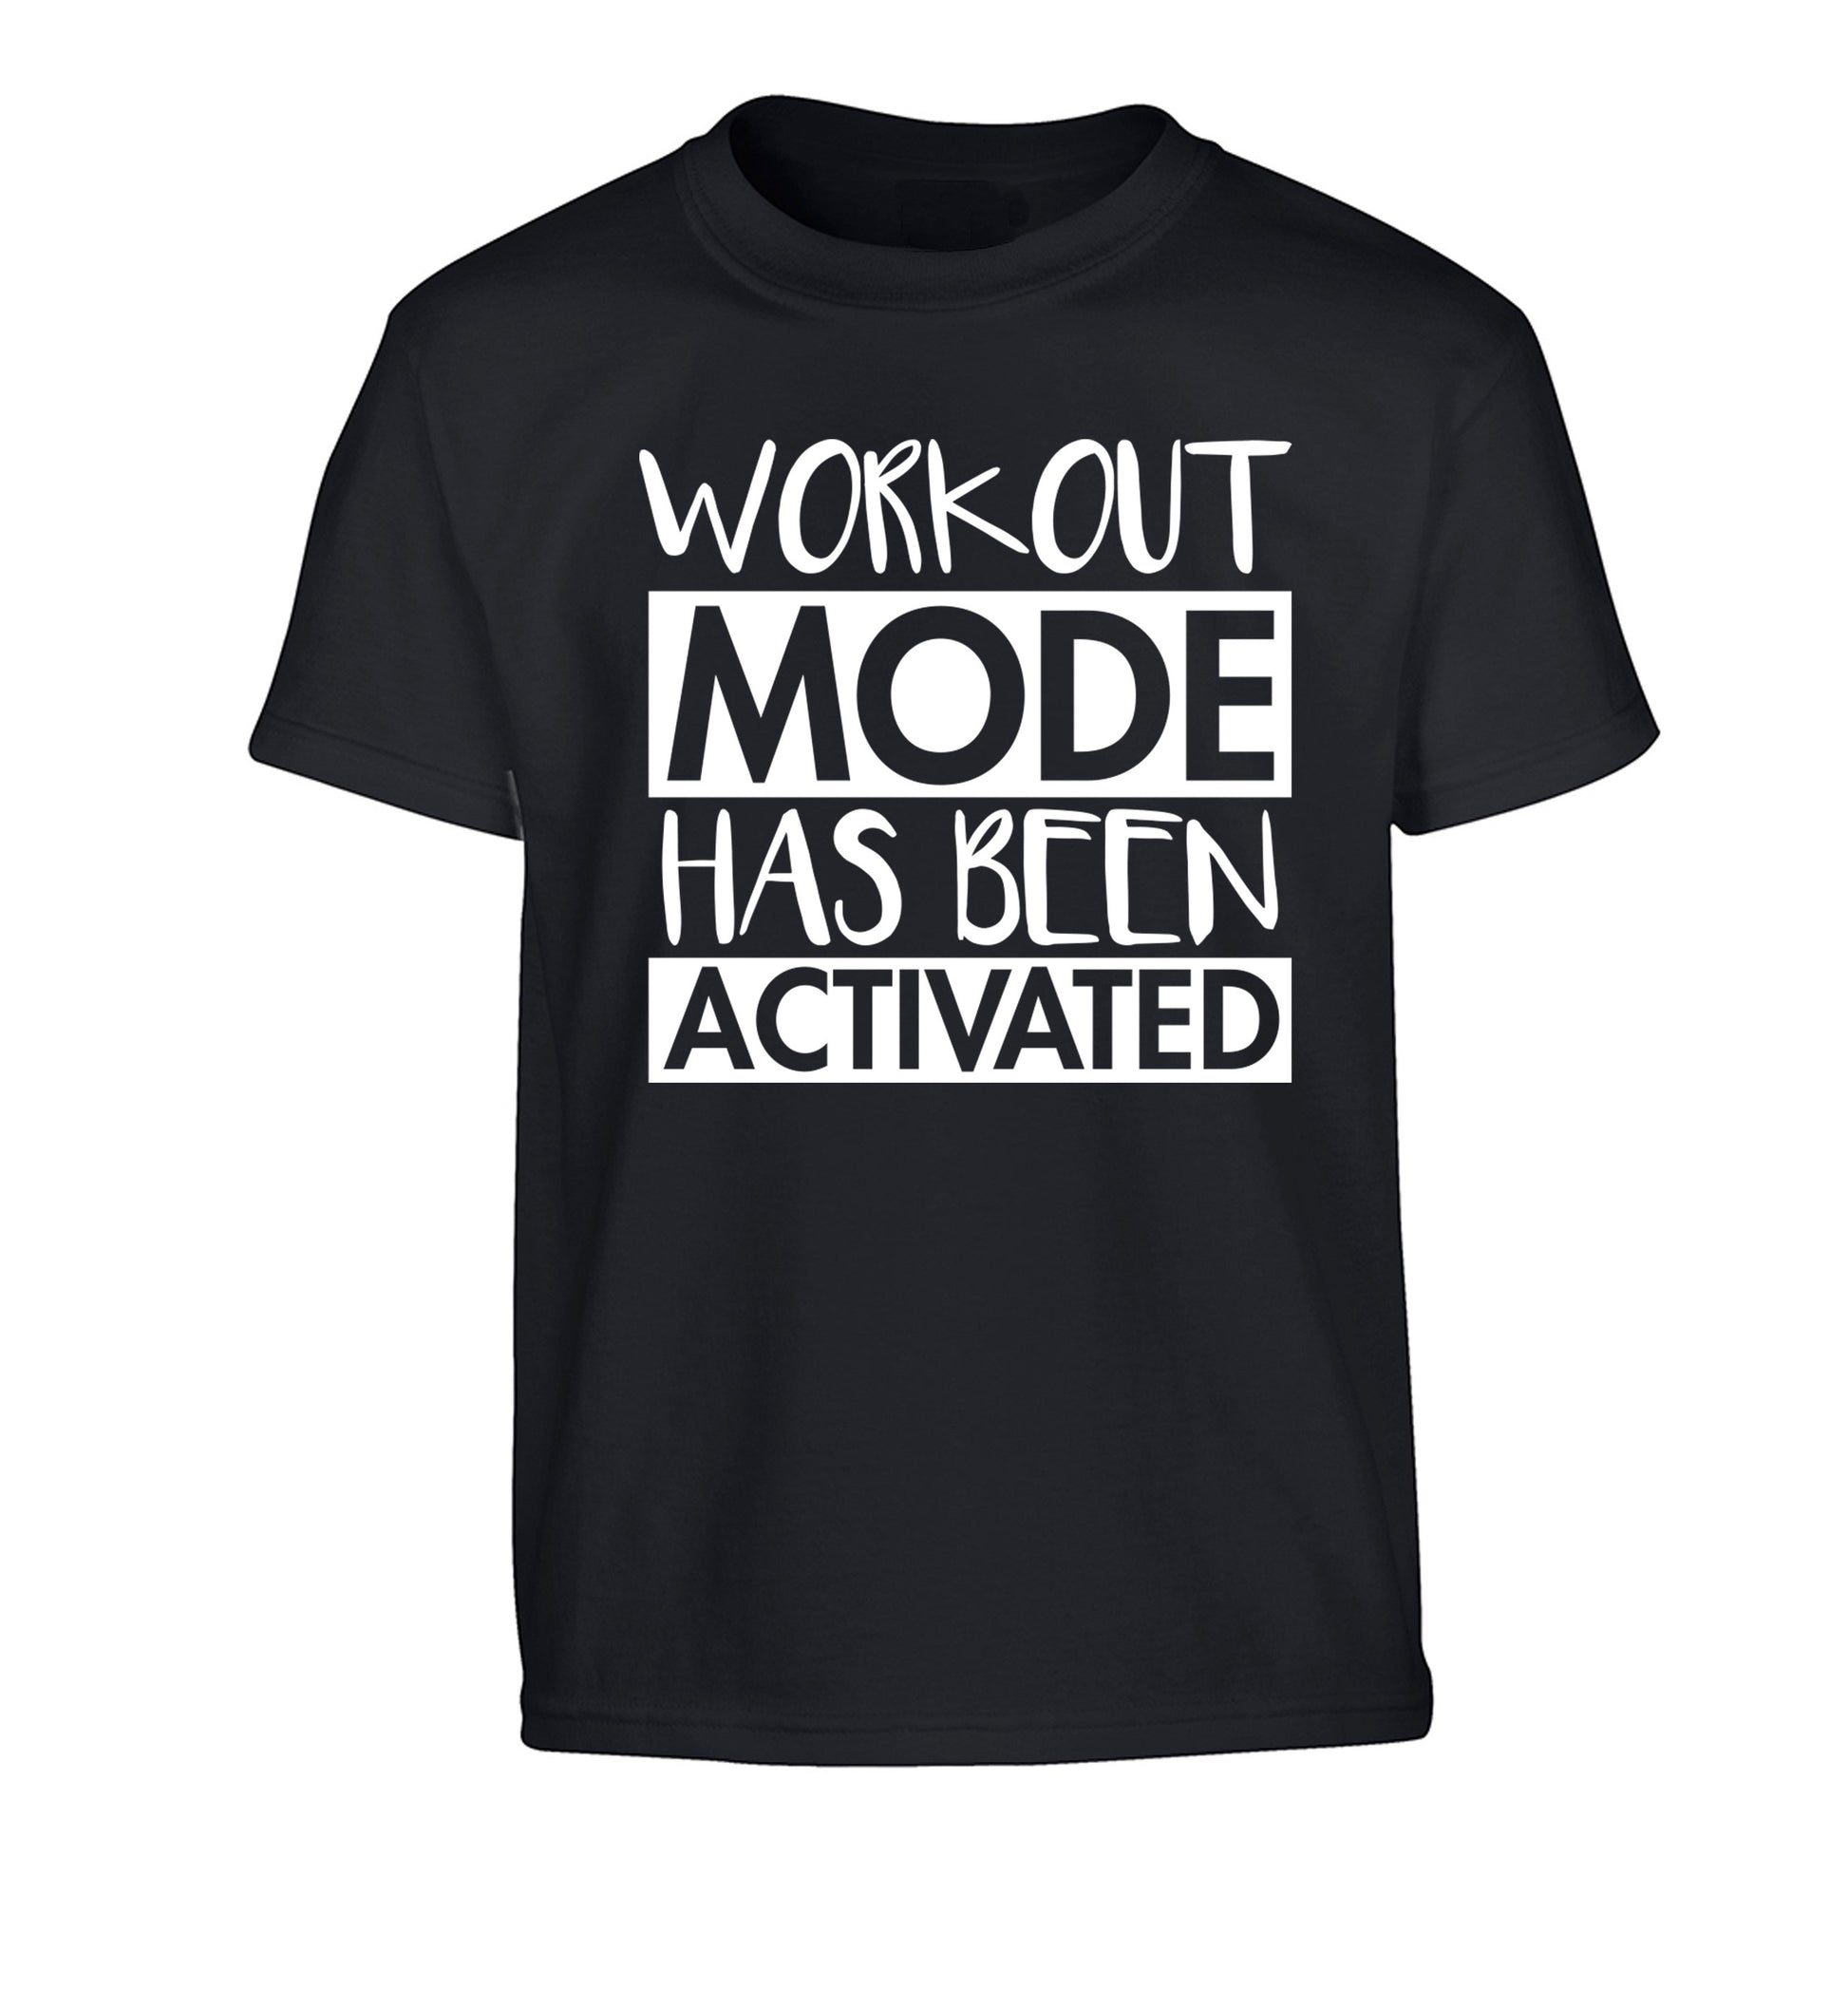 Workout mode has been activated Children's black Tshirt 12-14 Years